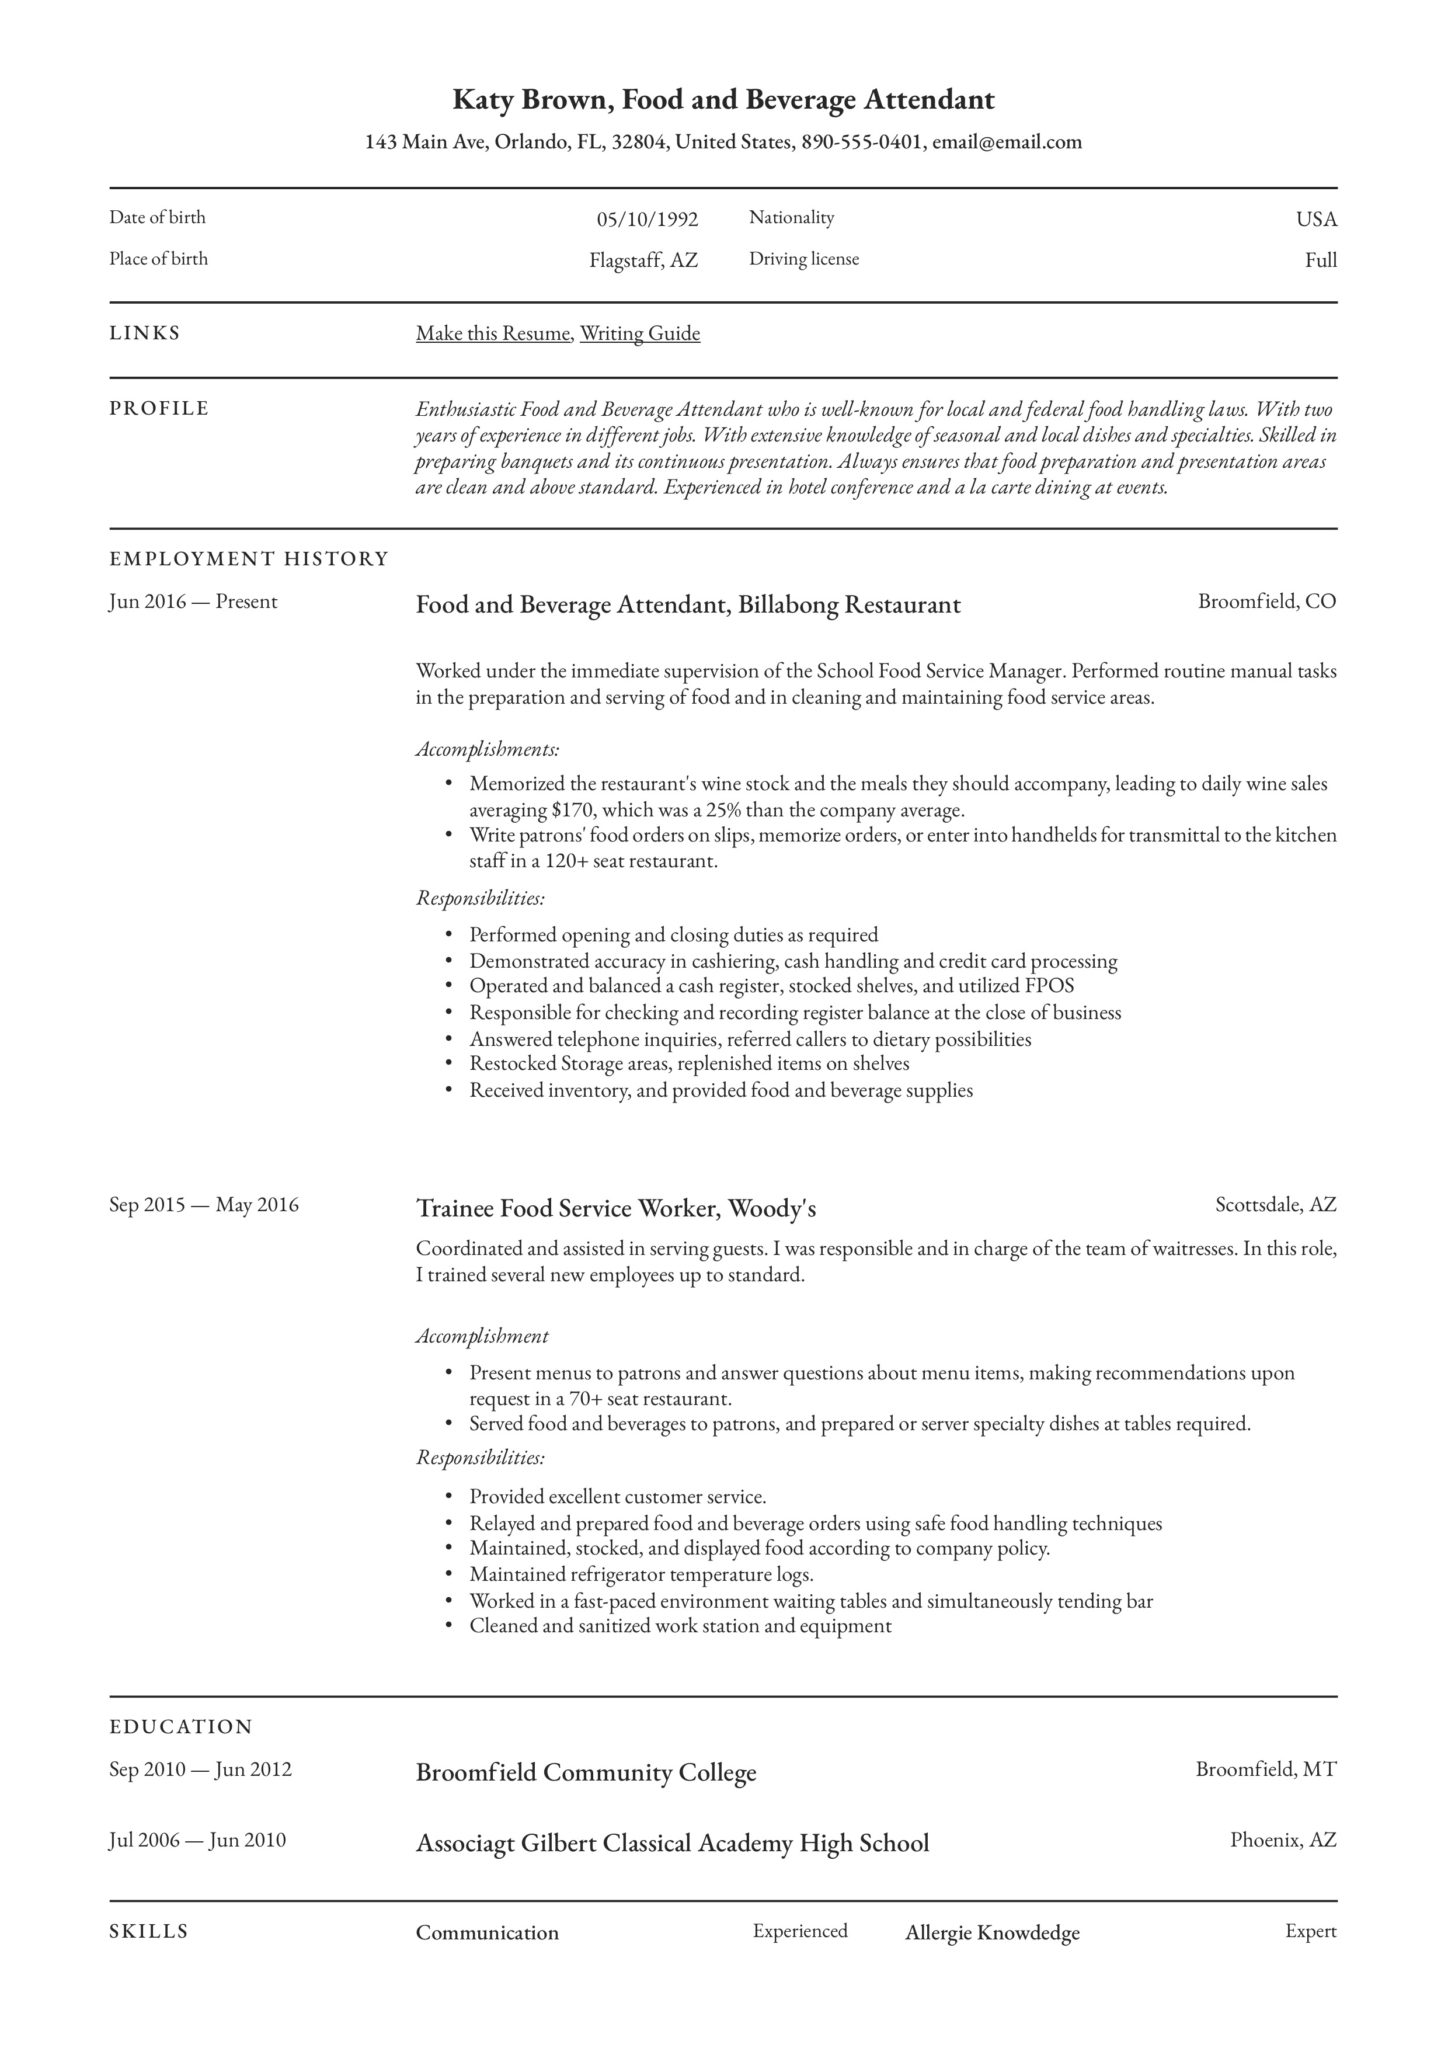 professional food and beverage attendant resume